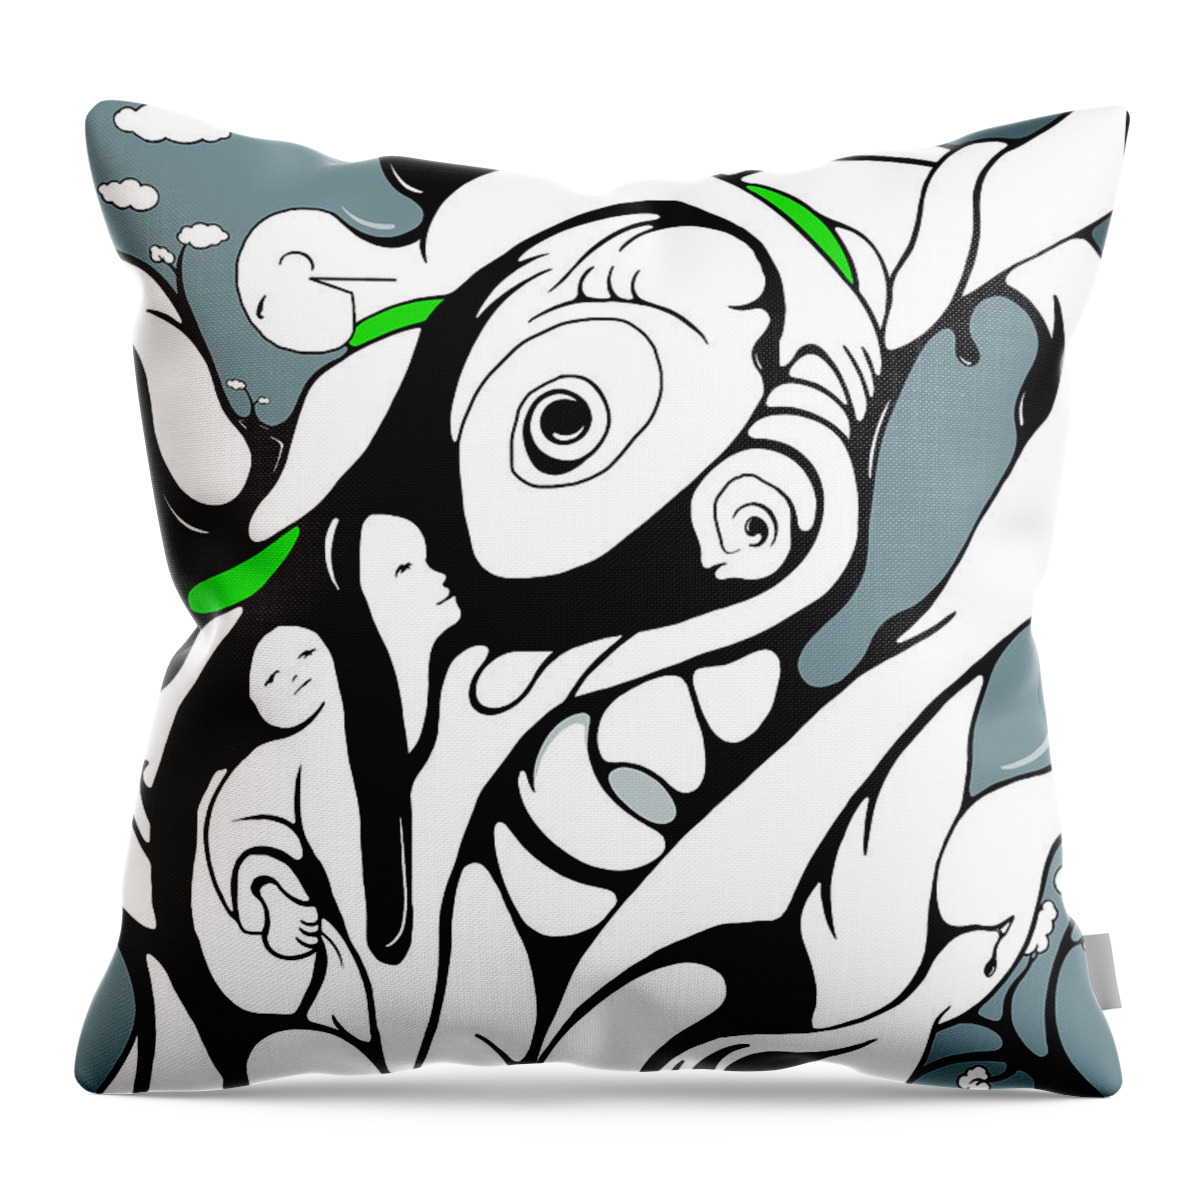 Female Throw Pillow featuring the digital art Generations by Craig Tilley